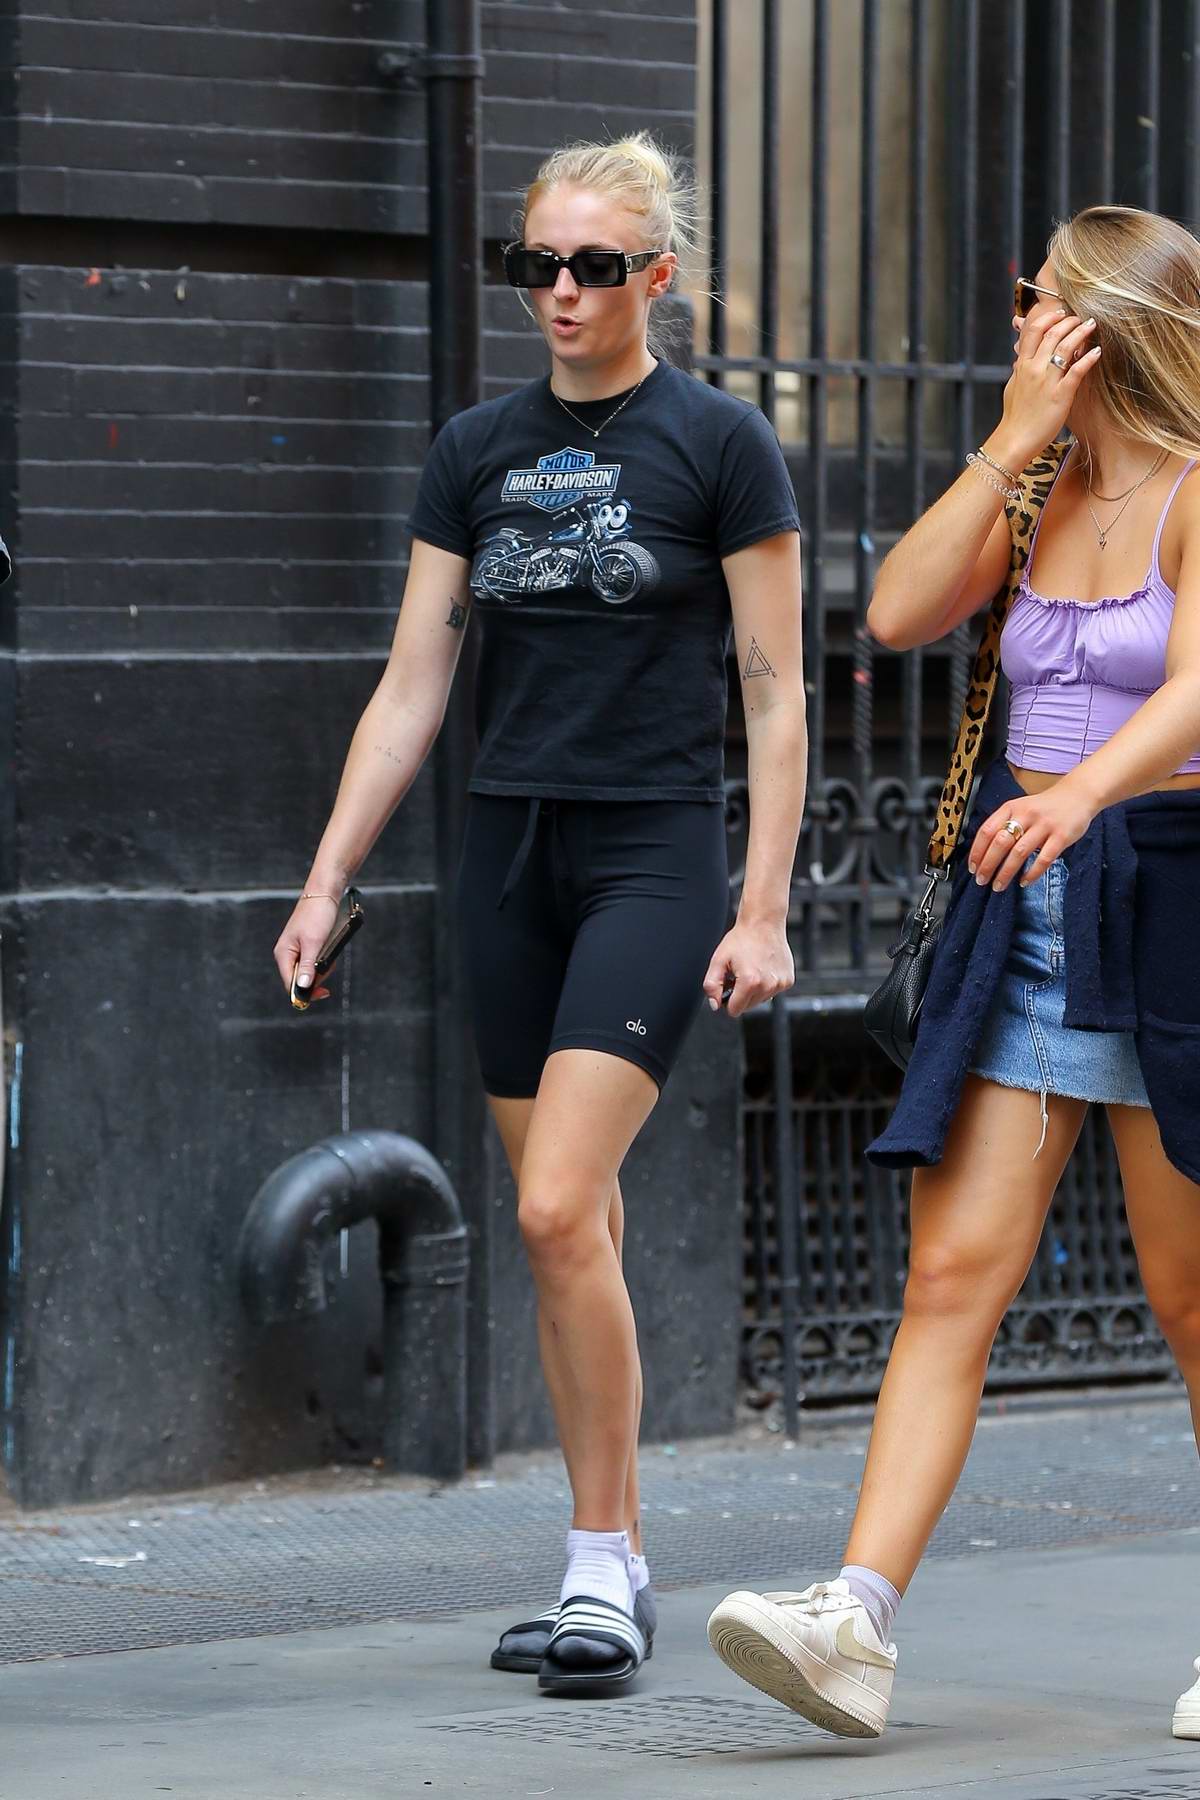 Sophie Turner sports a black Harley Davidson tee and black legging shorts  while out for a